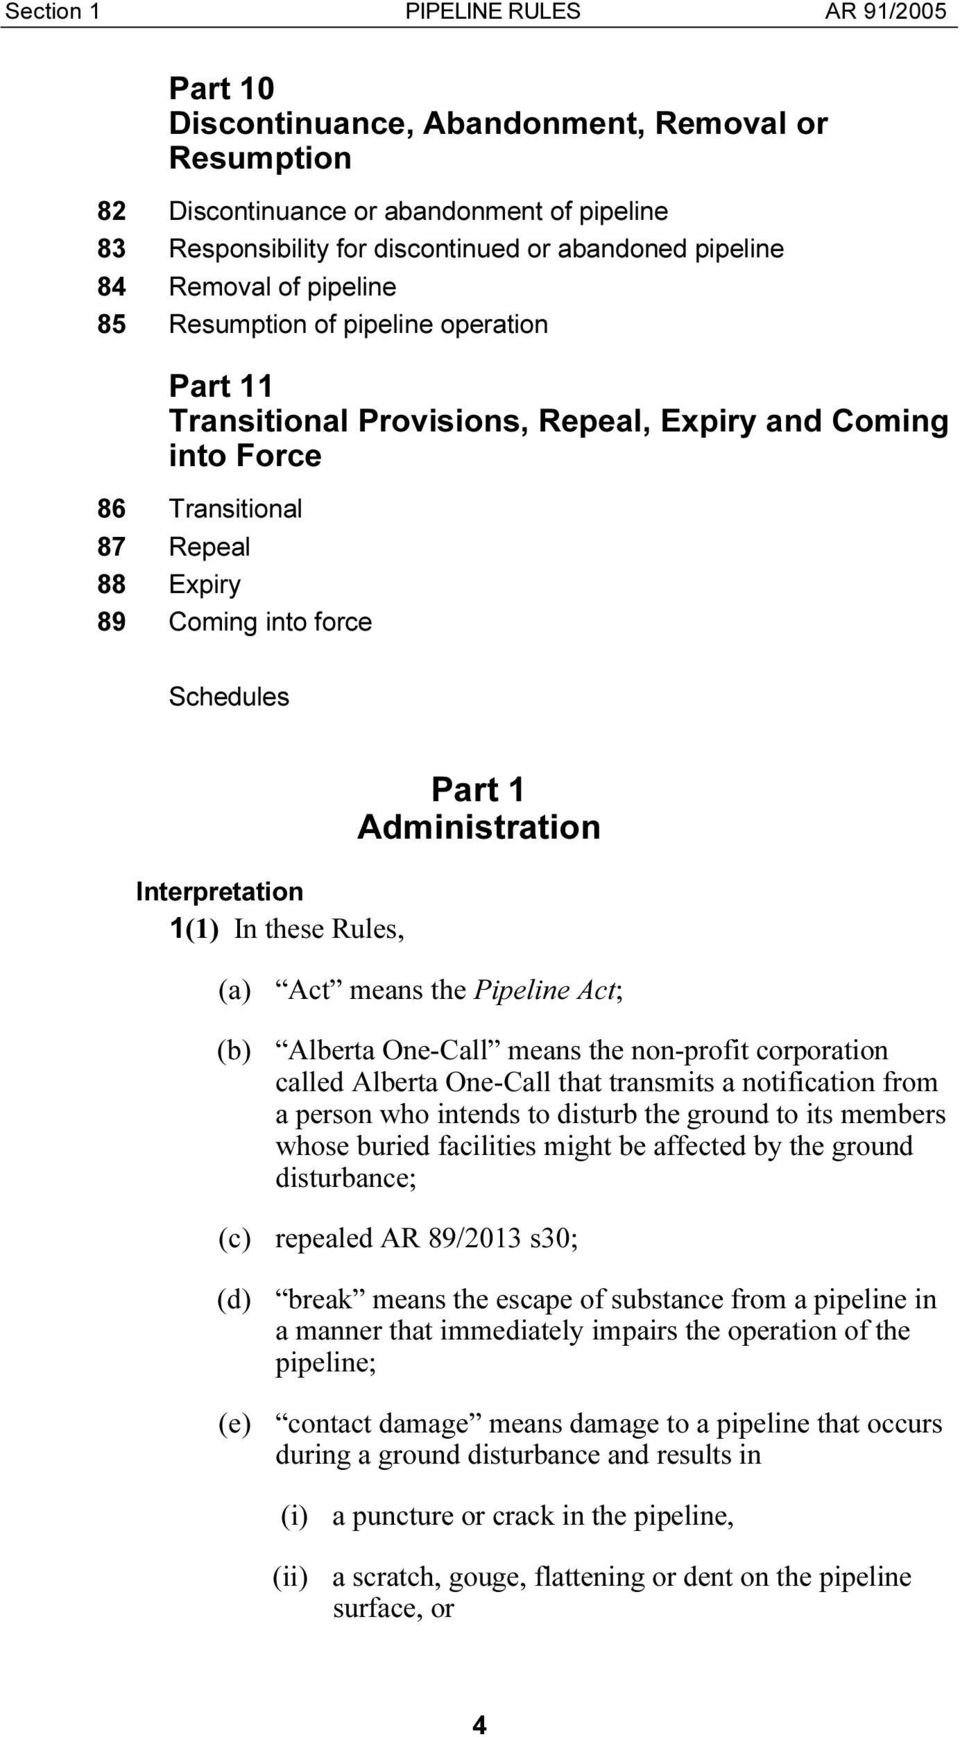 1(1) In these Rules, Part 1 Administration (a) Act means the Pipeline Act; (b) Alberta One-Call means the non-profit corporation called Alberta One-Call that transmits a notification from a person